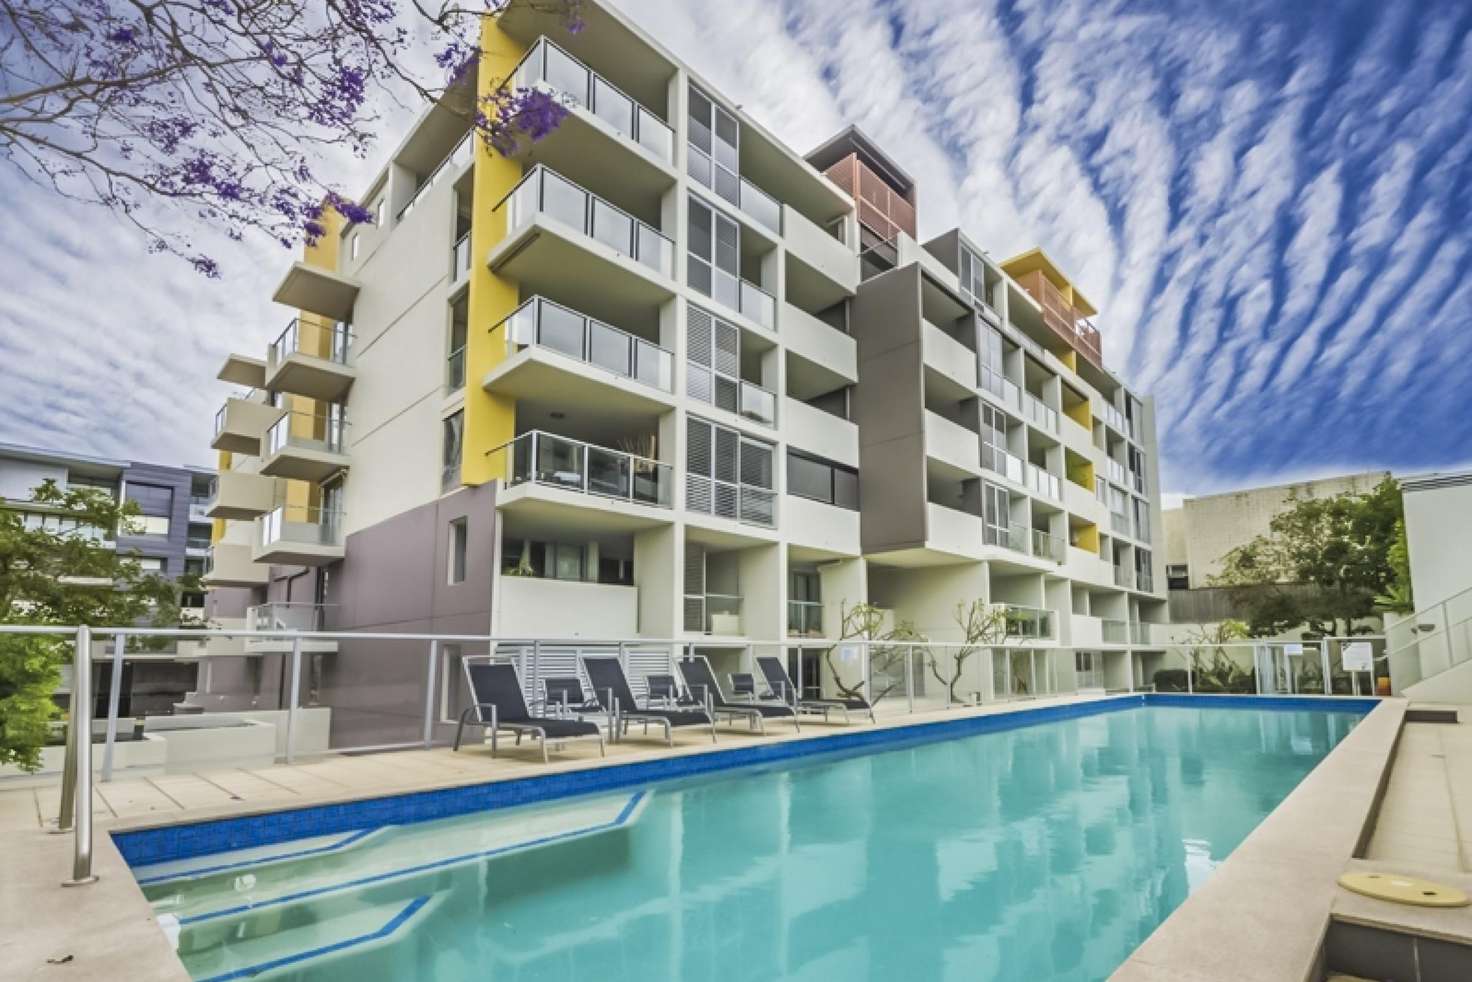 Main view of Homely apartment listing, LN:10320/6-10 Manning, South Brisbane QLD 4101